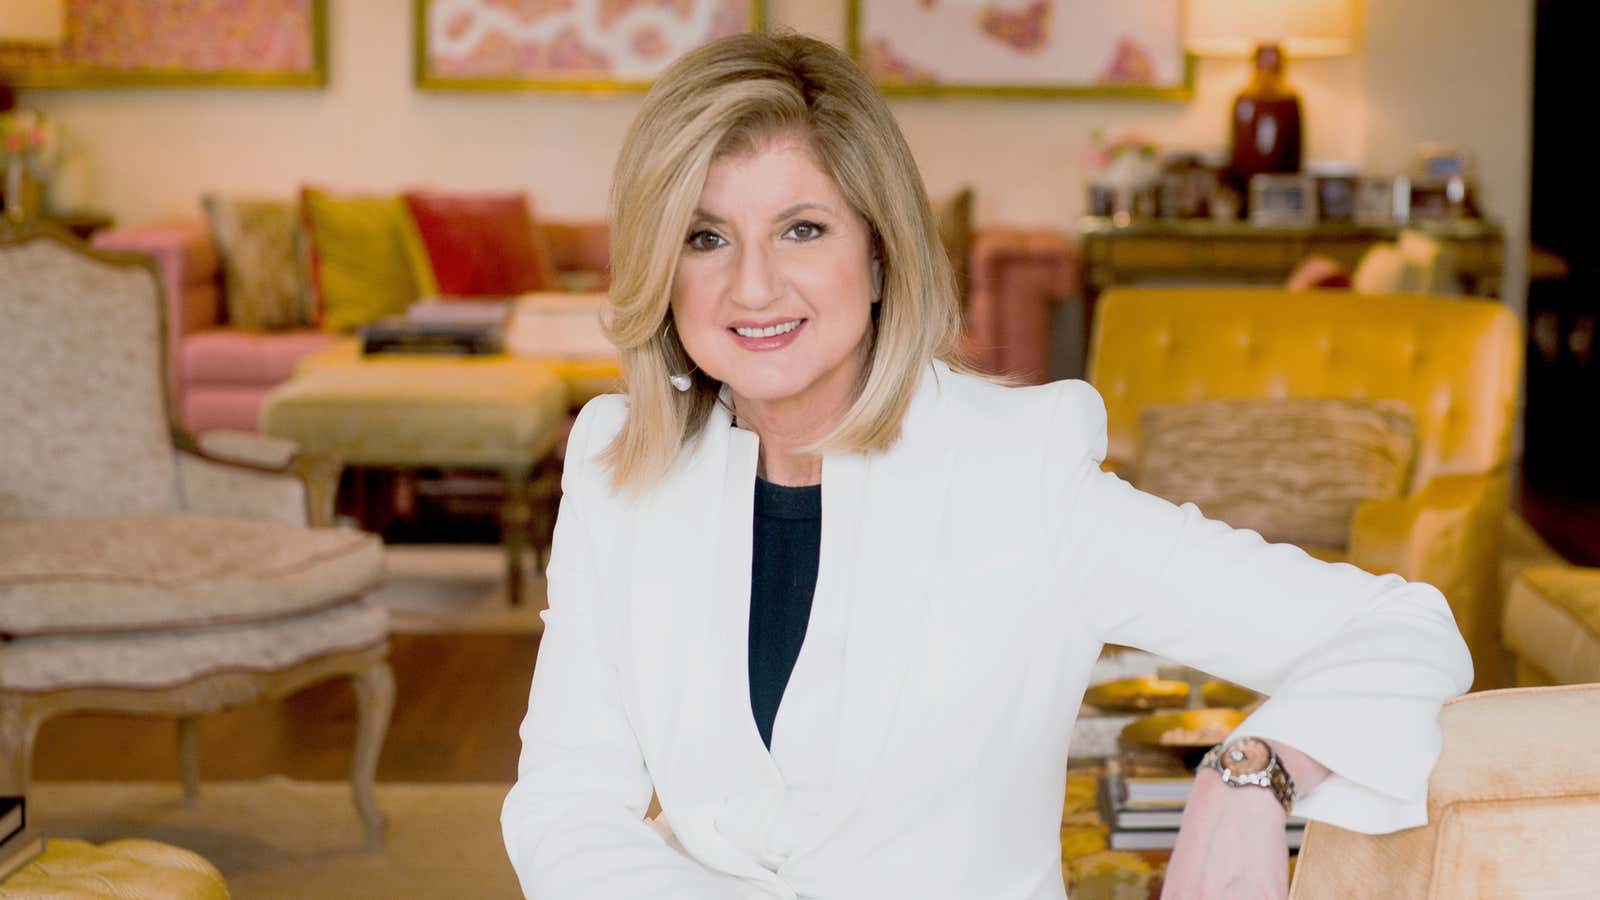 Arianna Huffington was depressed and broke until a loan changed her life